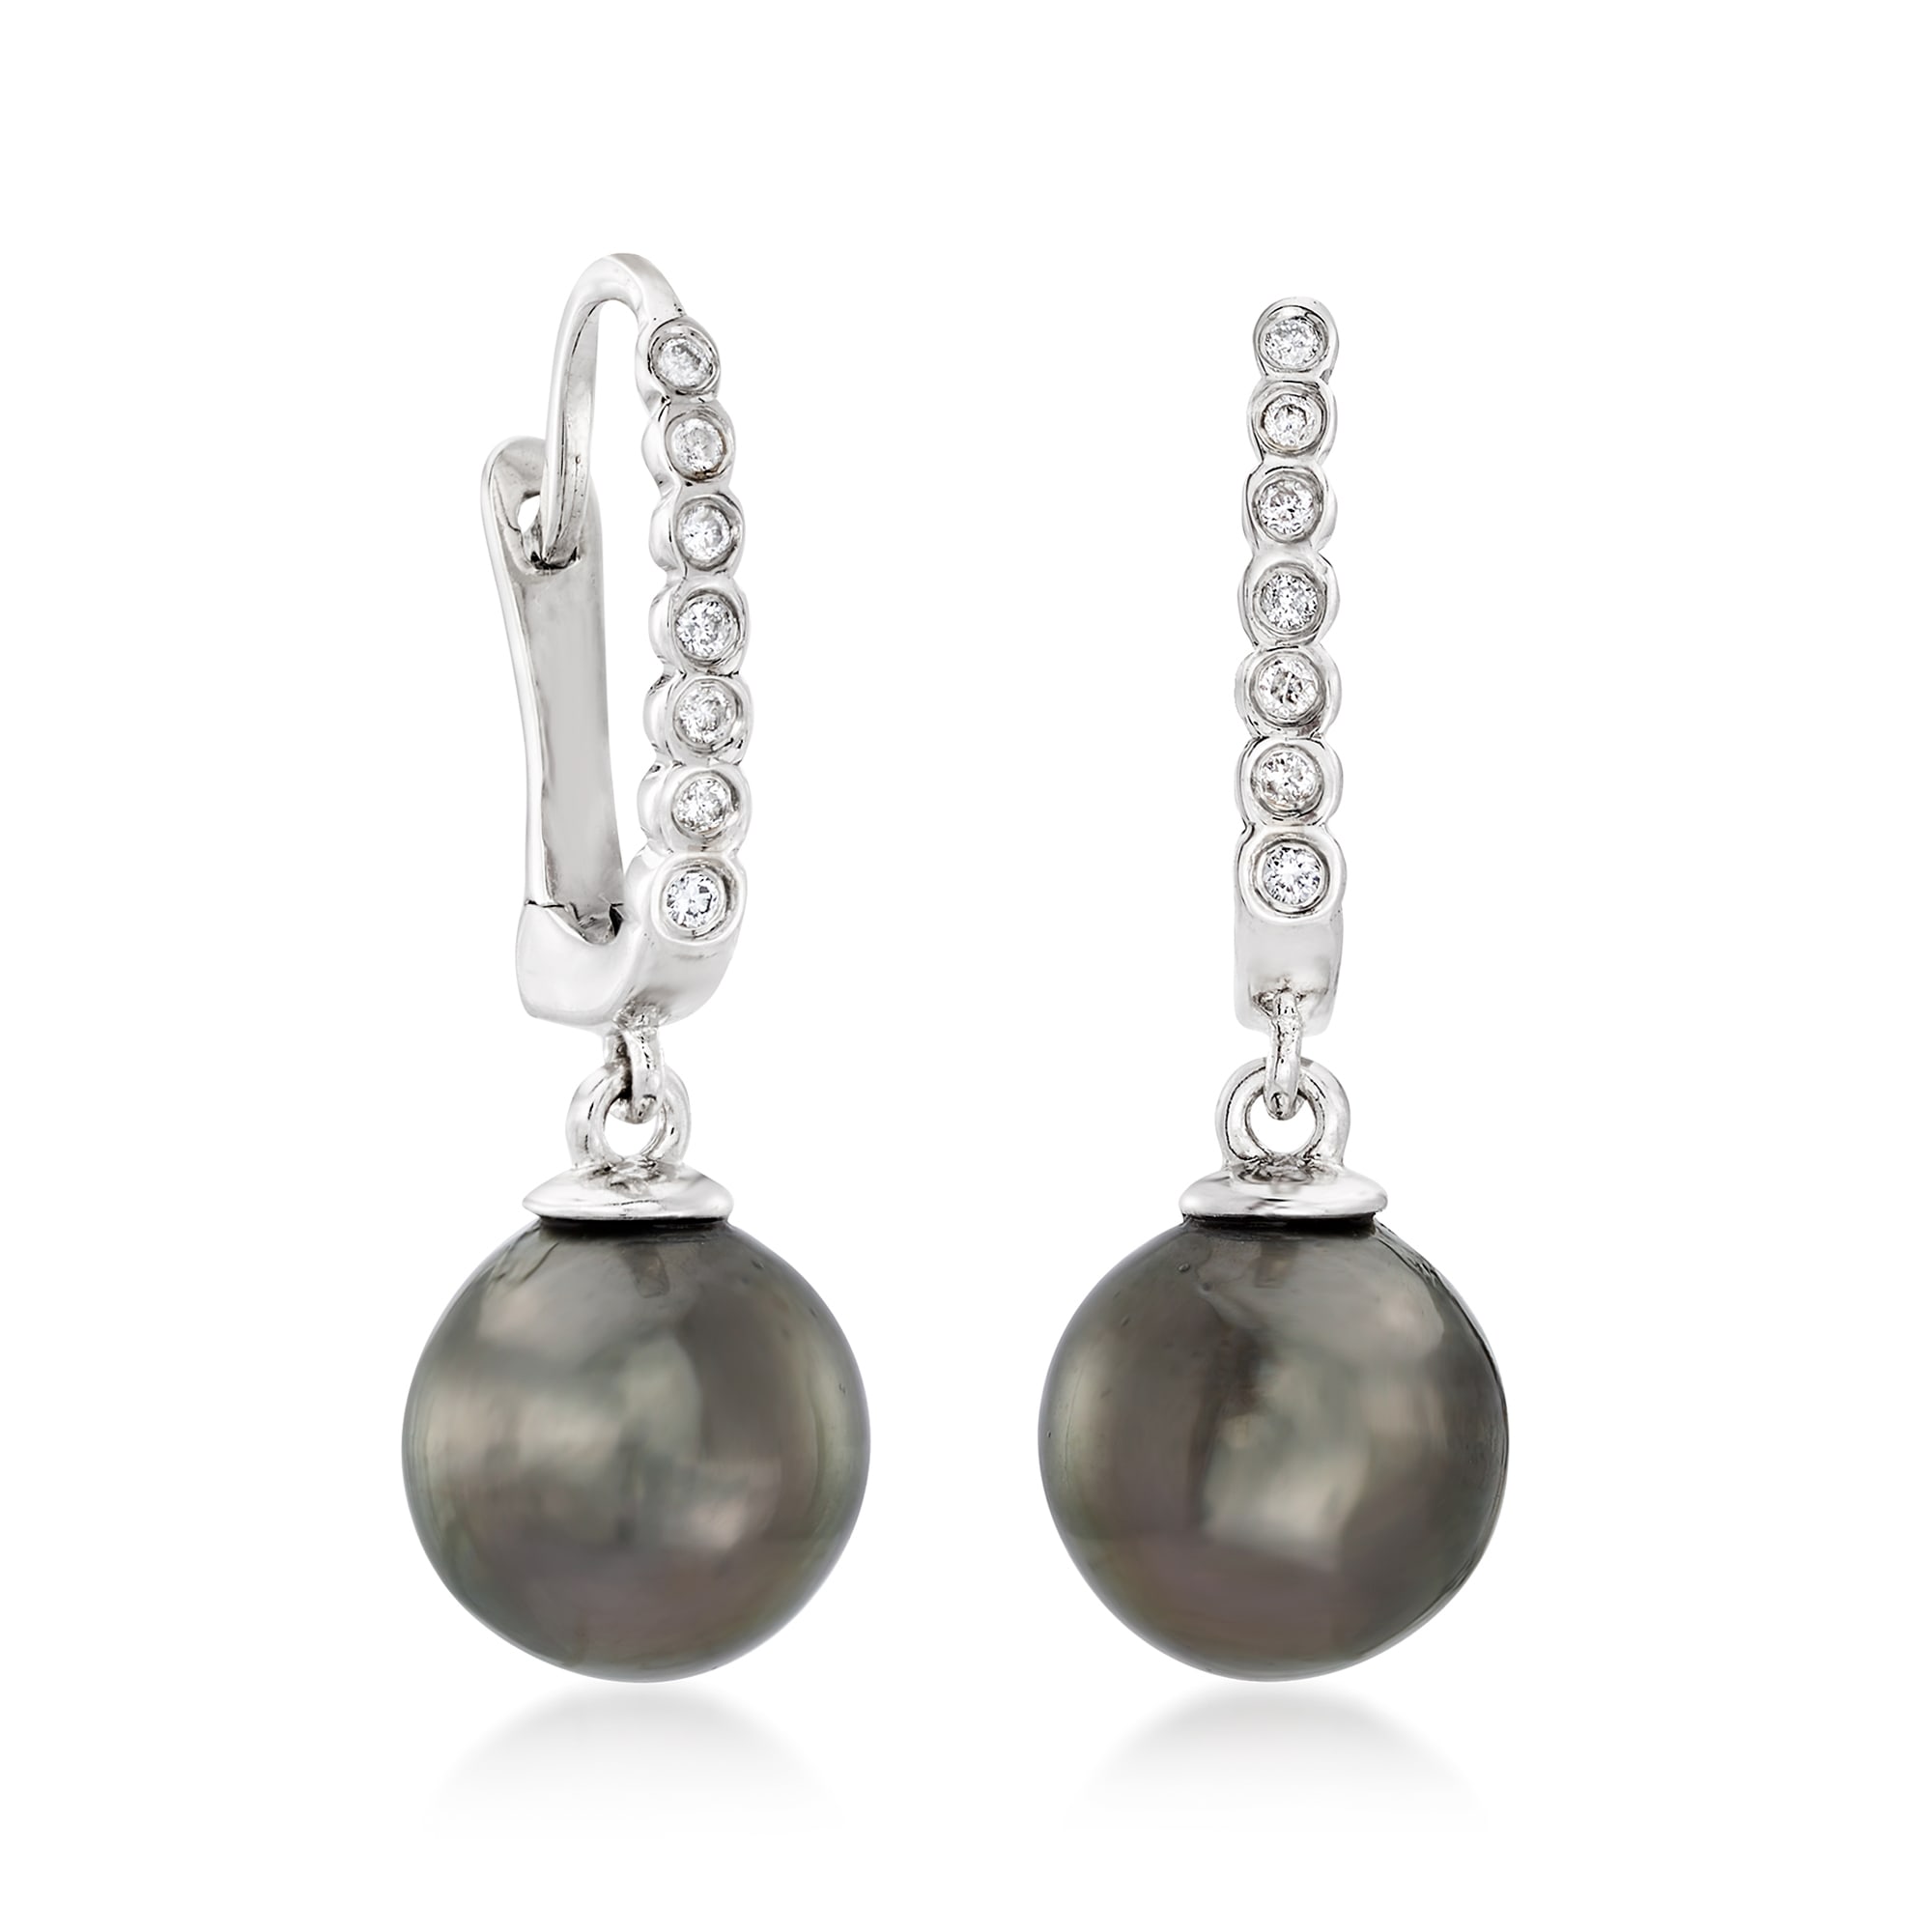 8-9mm Black Cultured Tahitian Pearl Drop Earrings with Diamond Accents ...